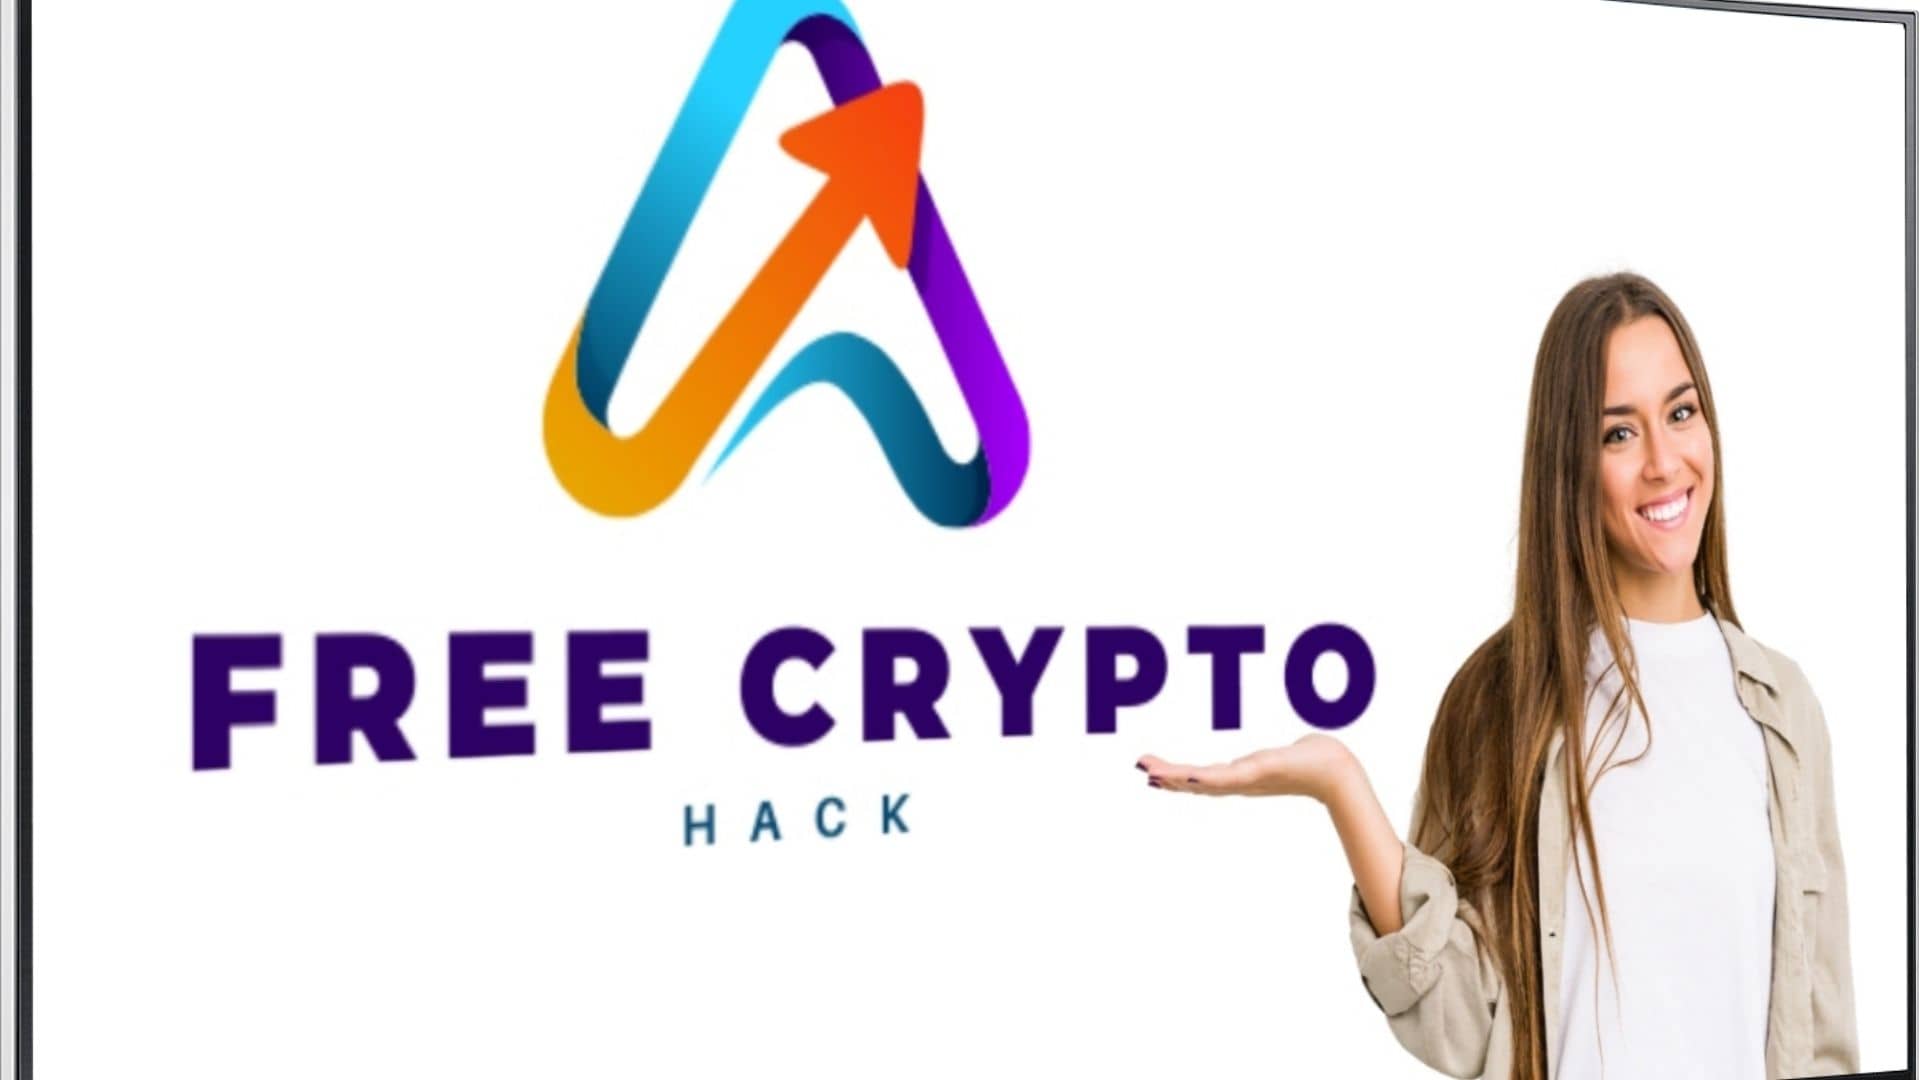 Free Crypto Hack review